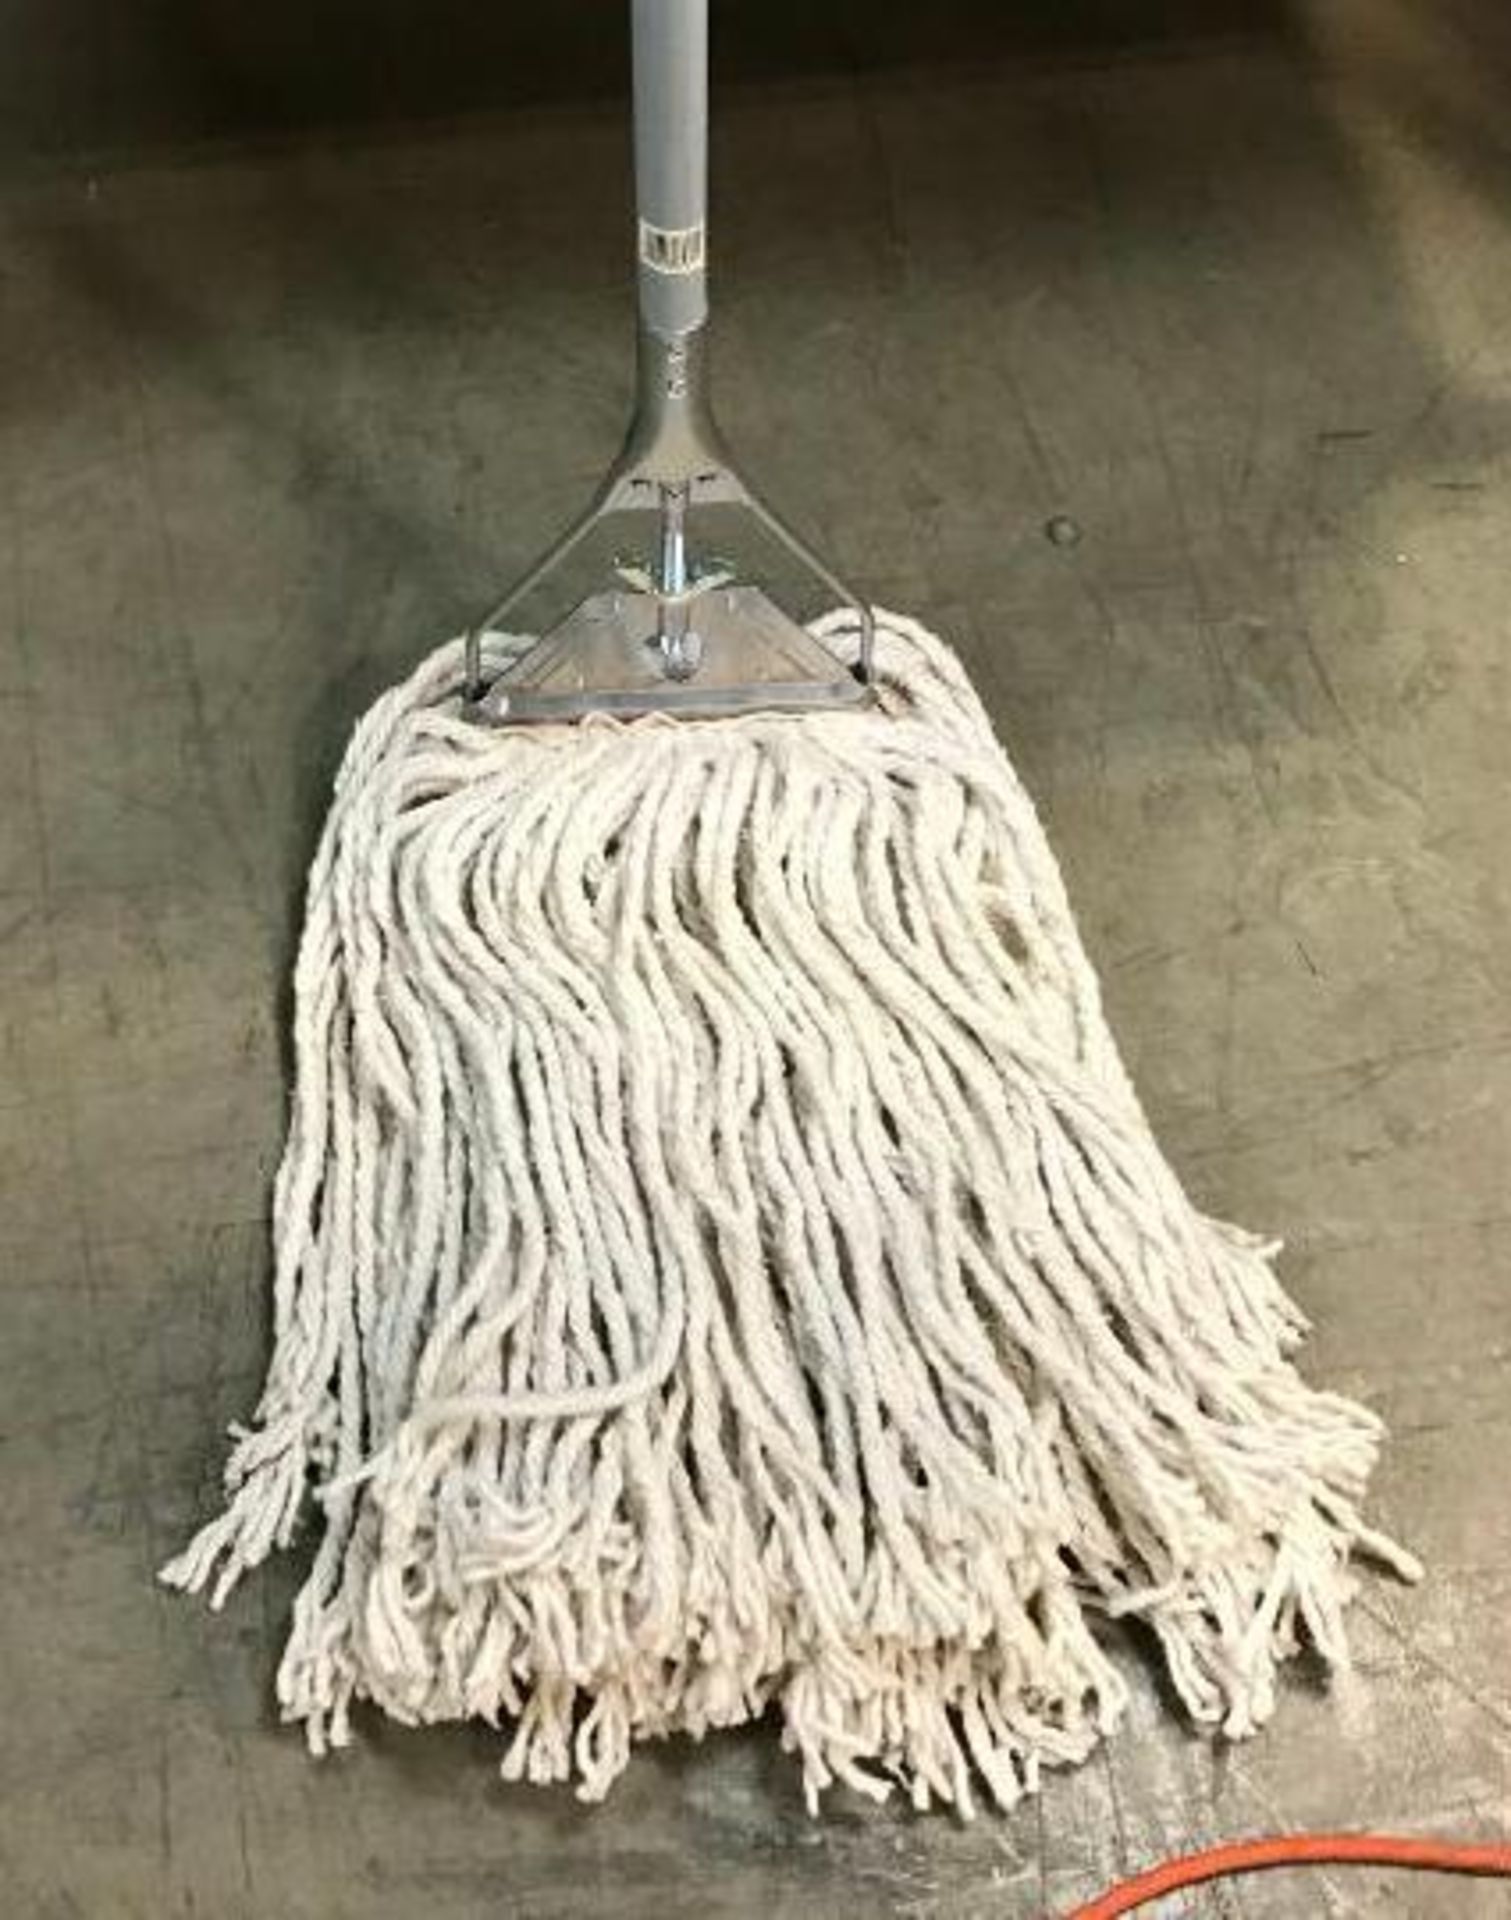 60" METAL HANDLE MOP WITH QUICK RELEASE HEAD - Image 2 of 3